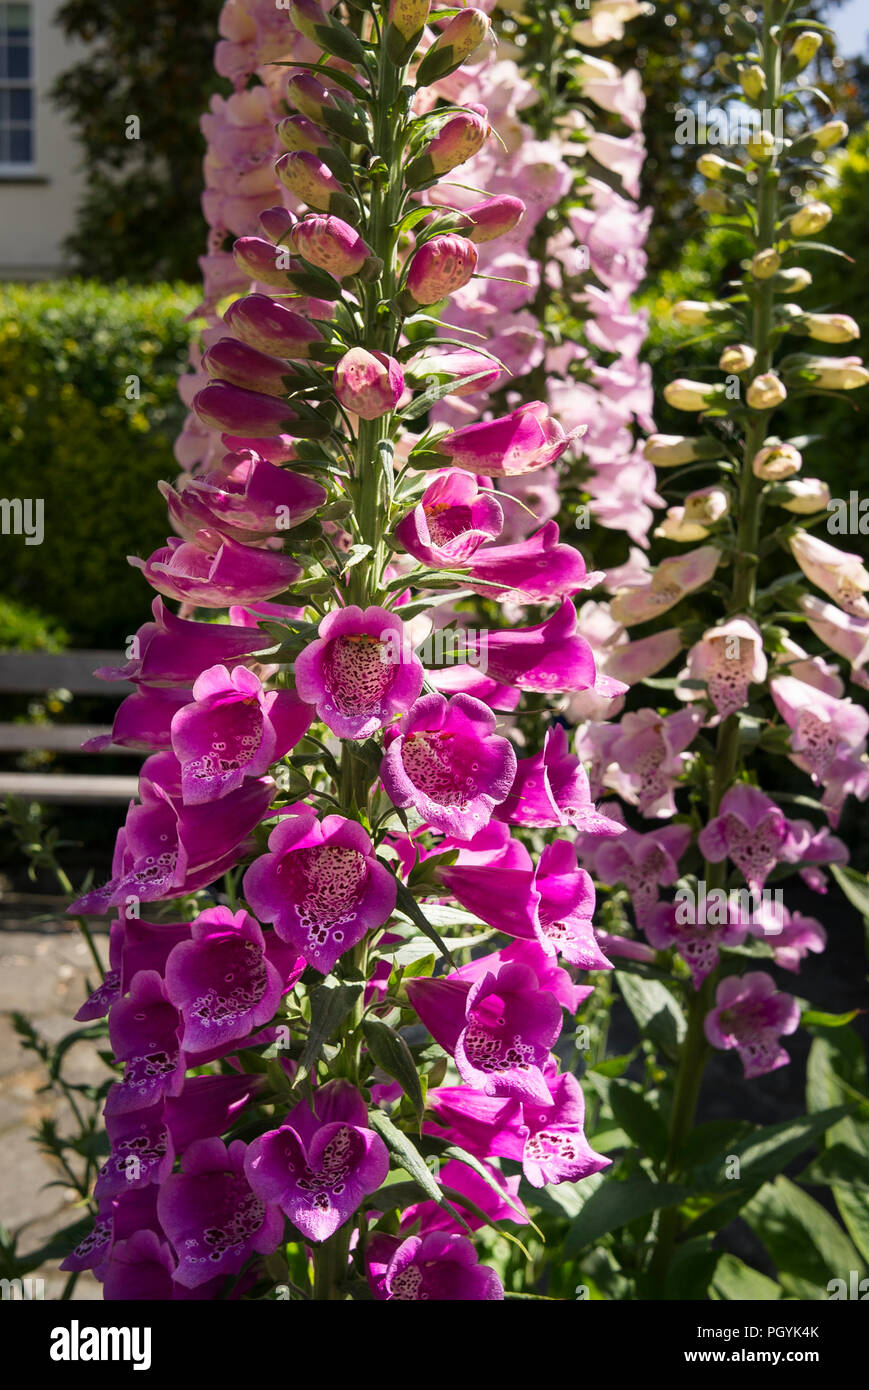 Colourful digitalis flowers in an urban public garden in May UK Stock Photo